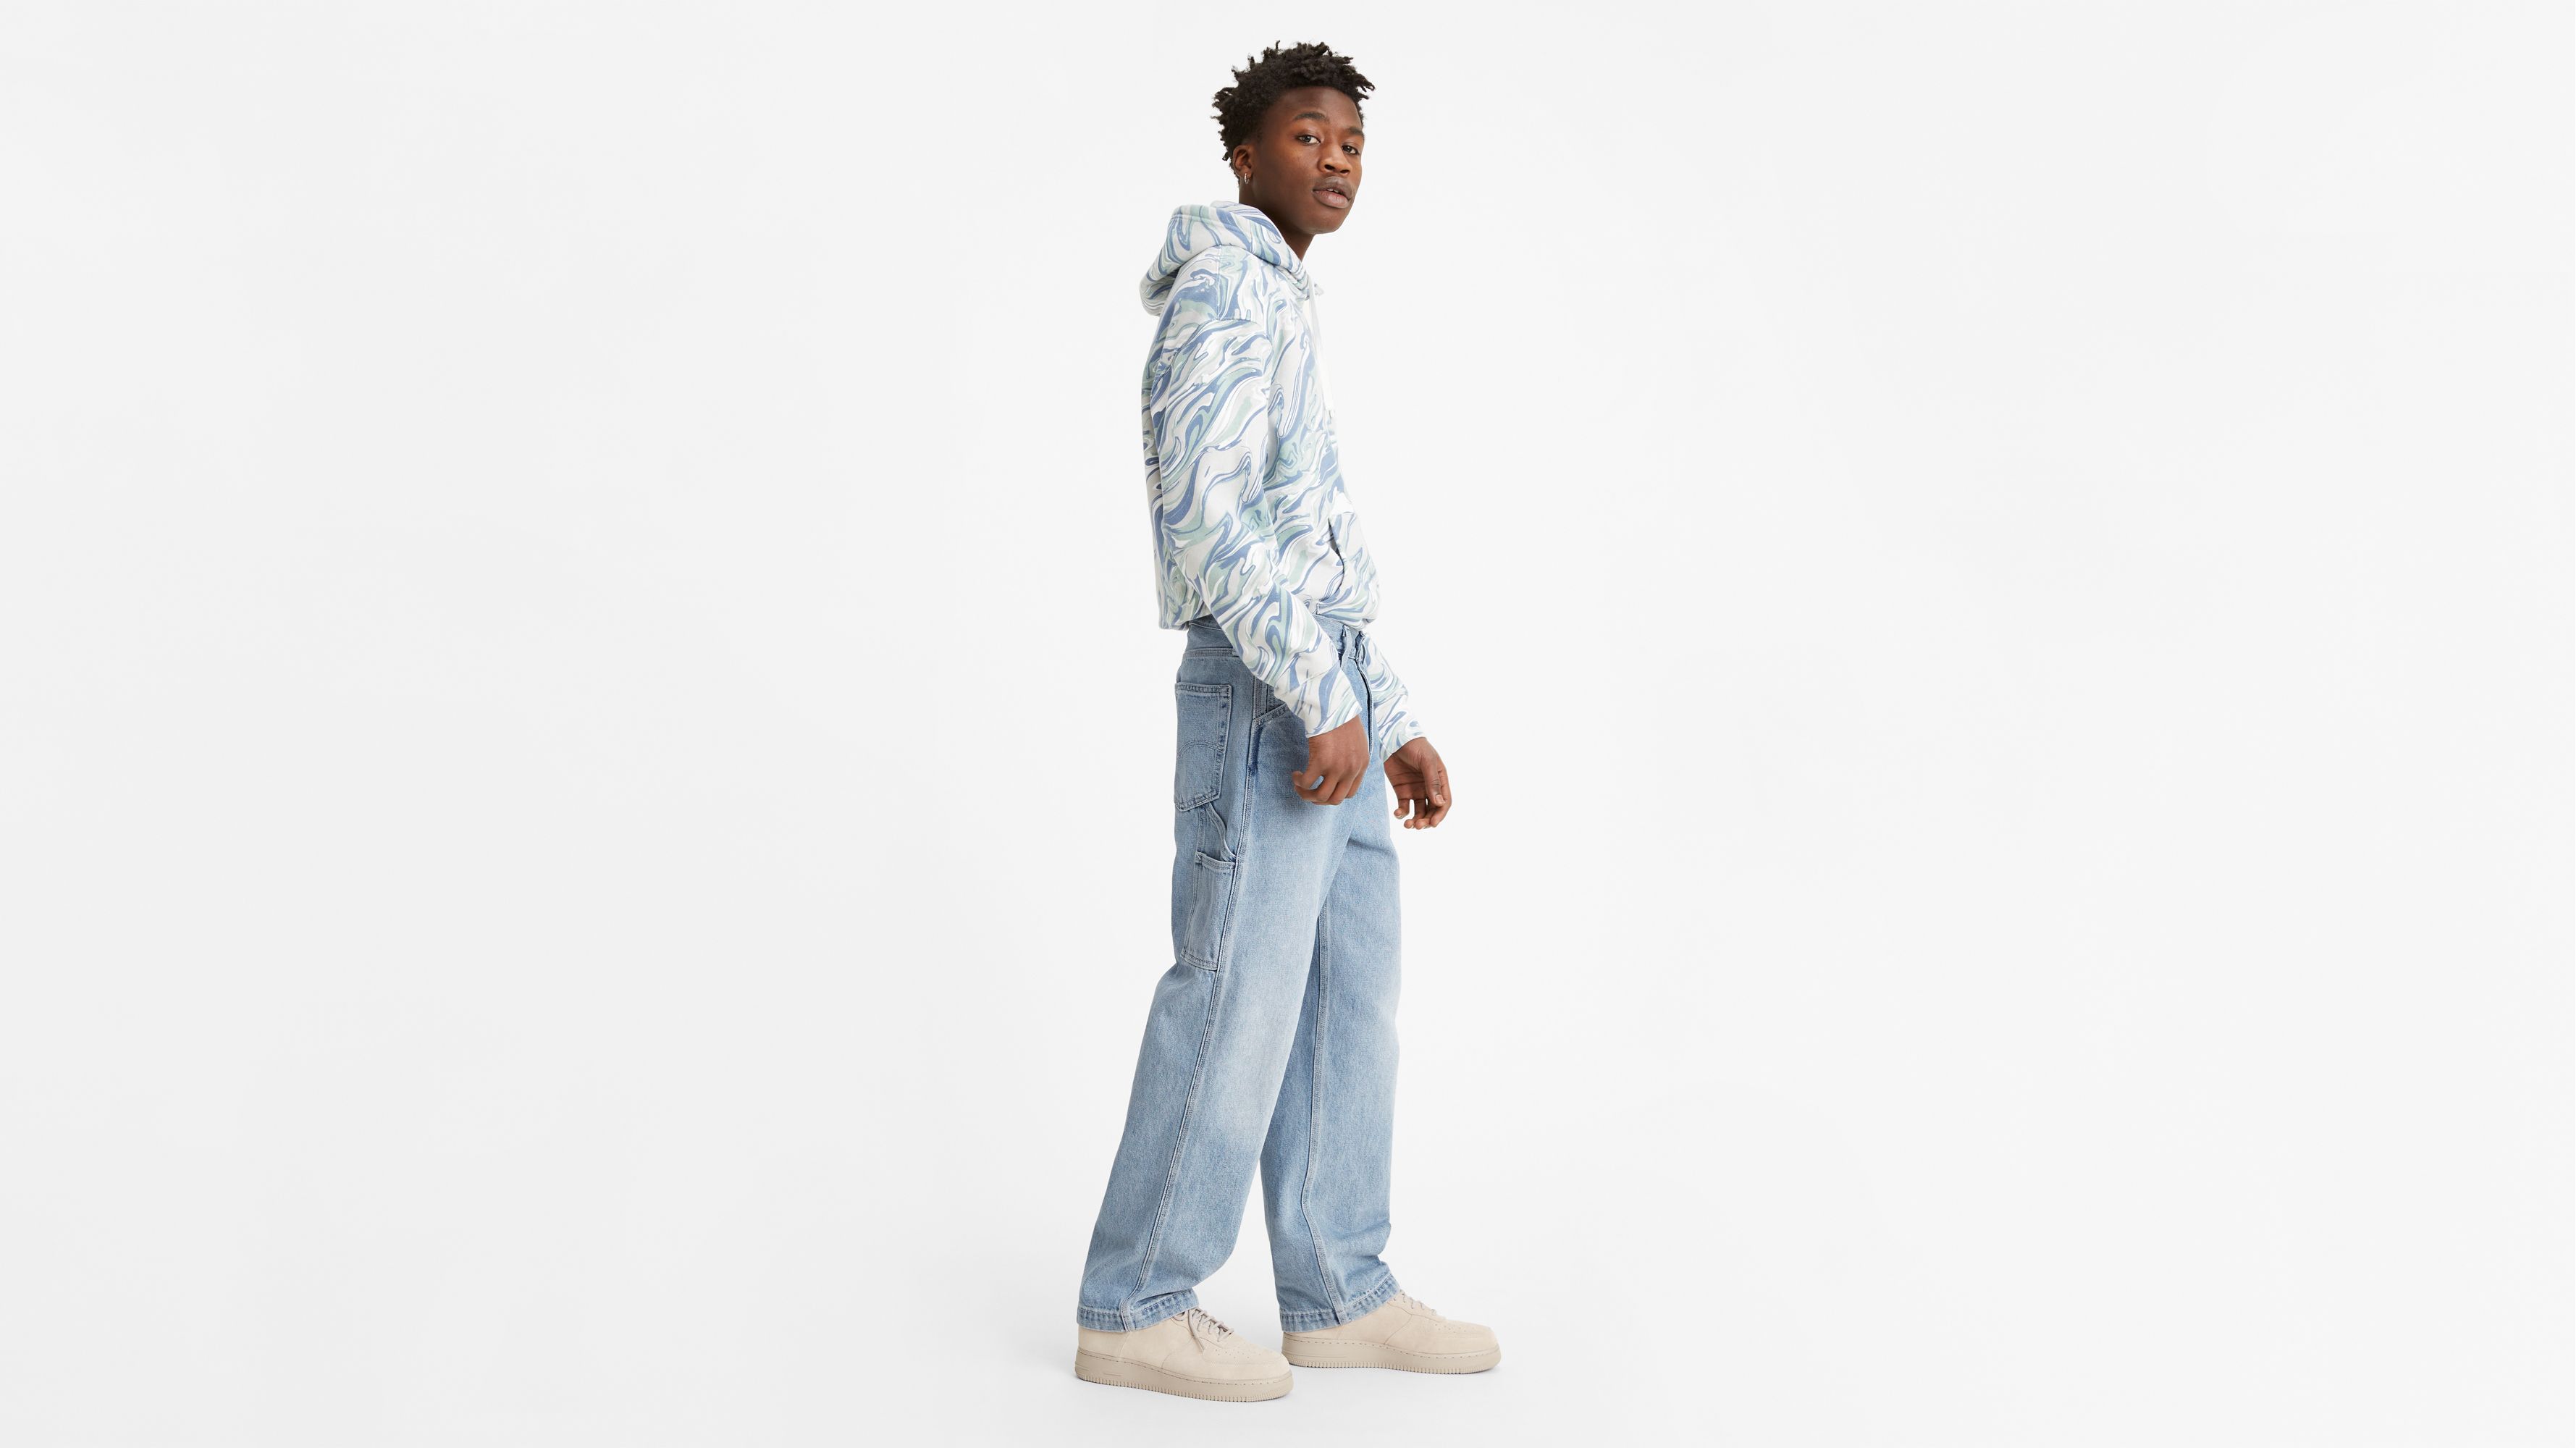 Levis Stay Loose Carpenter Jeans, Spotted Road